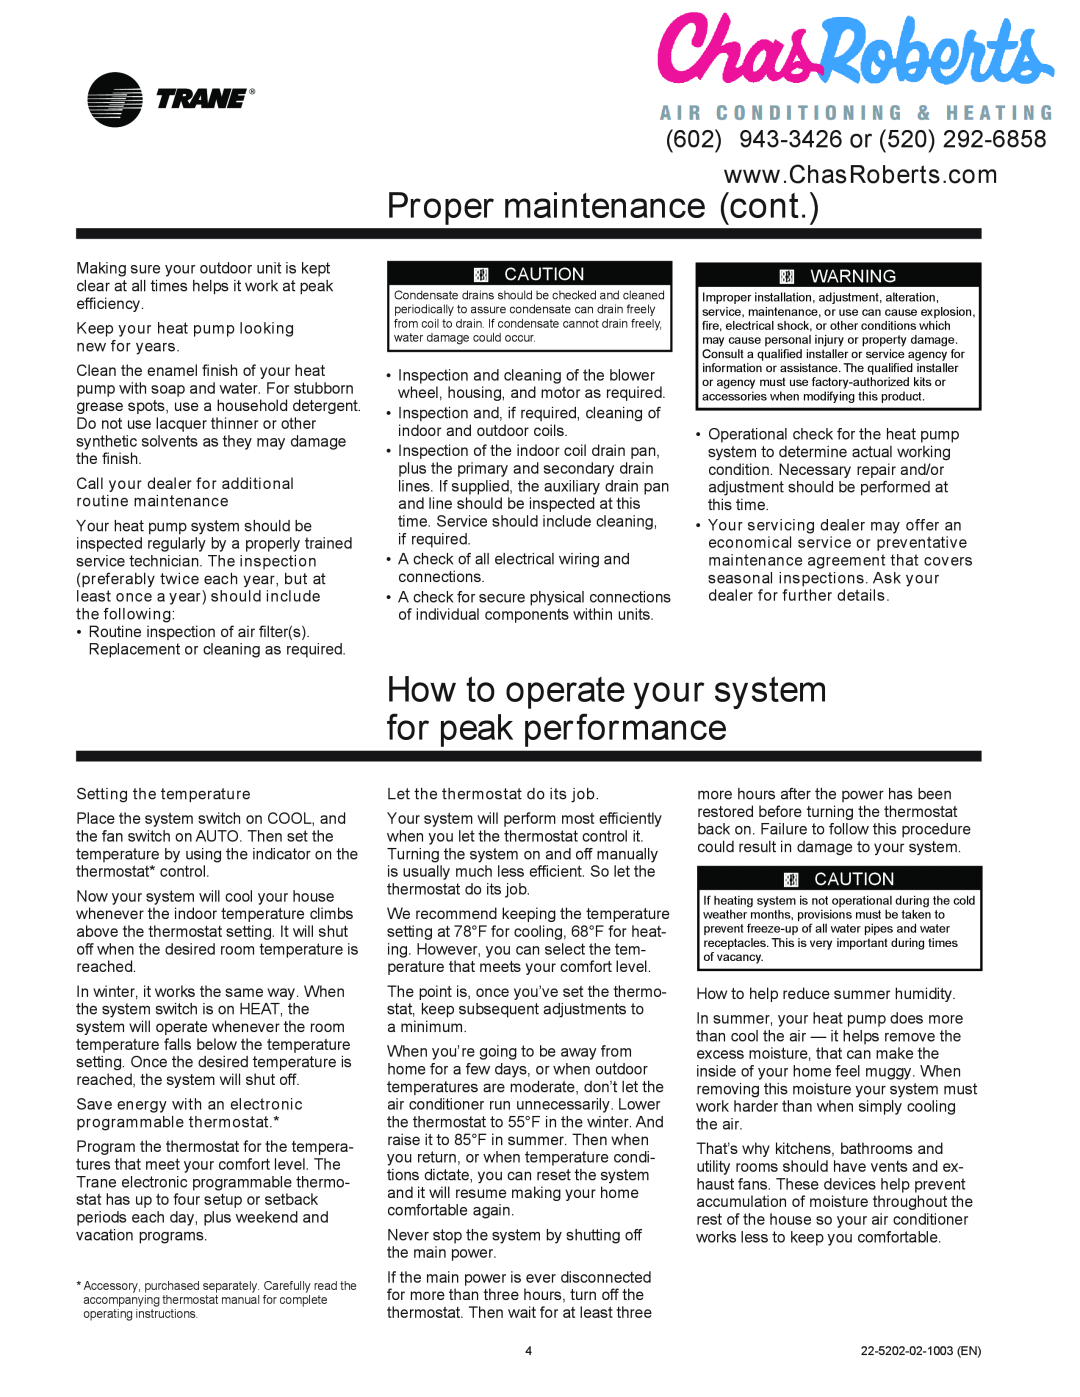 Trane 22-5202-03-3605 Proper maintenance cont, How to operate your system for peak performance, 00! CAUTION, 00! WARNING 